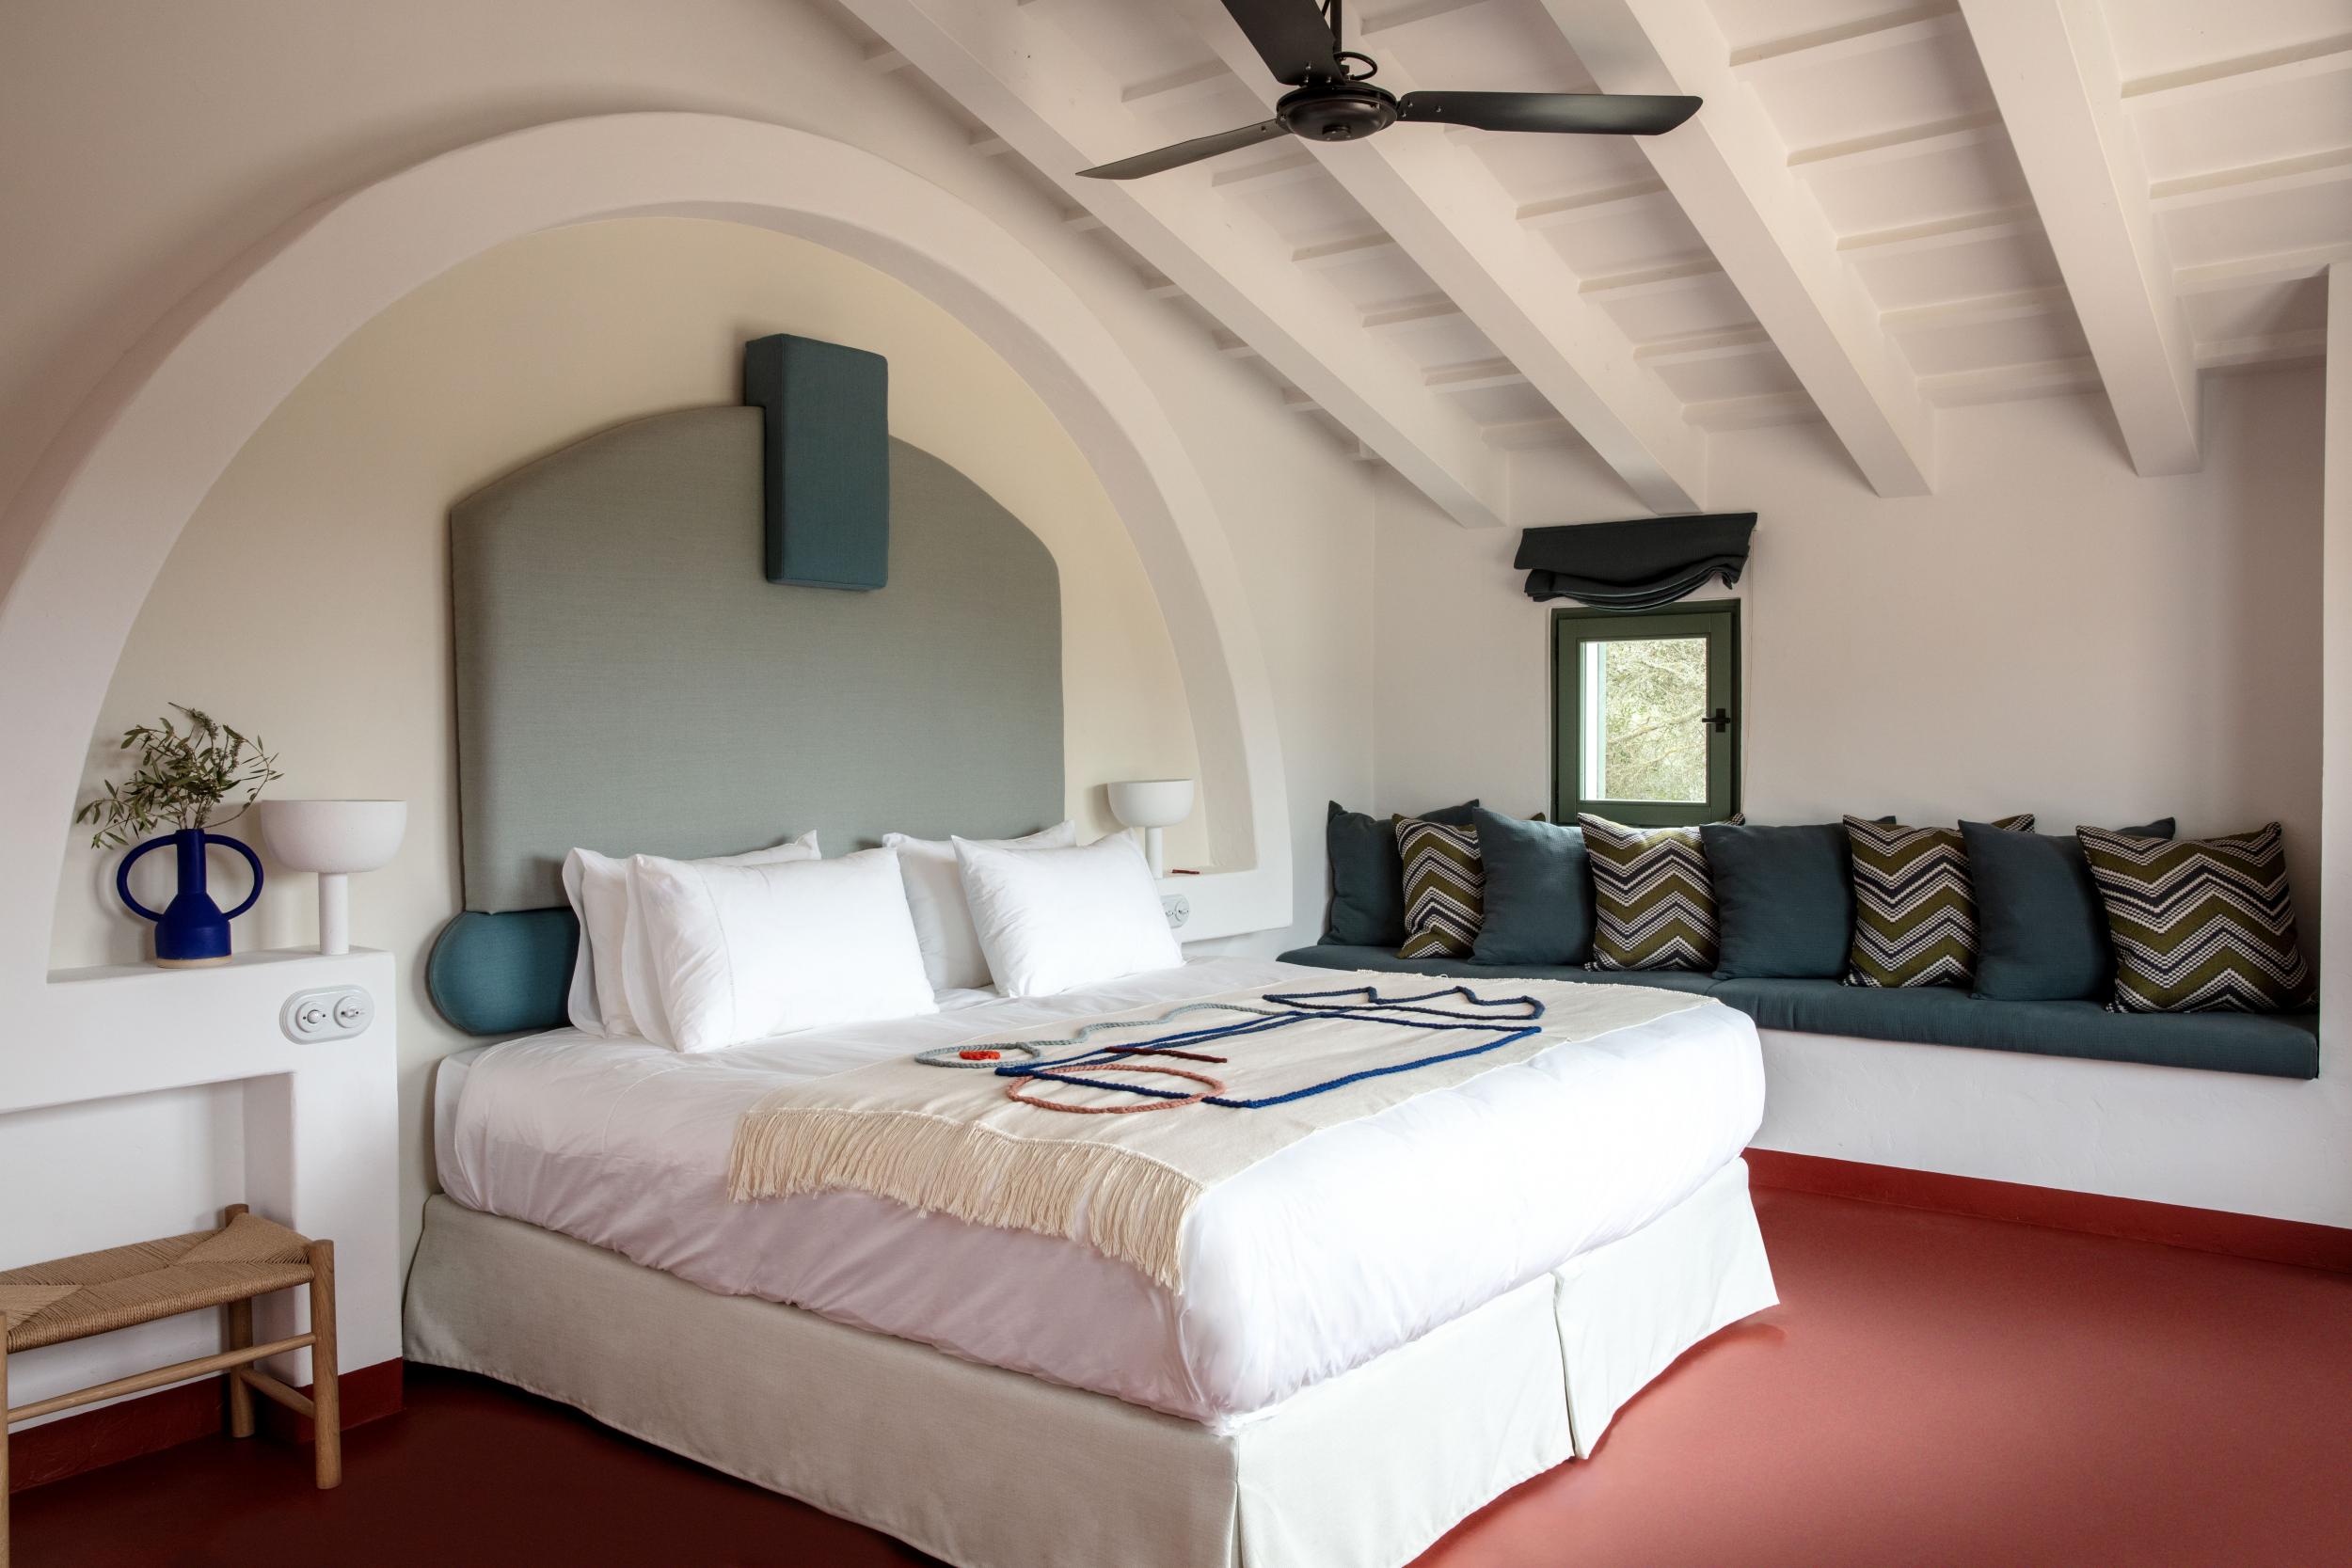 Experimental Menorca is housed in a 19th-century finca